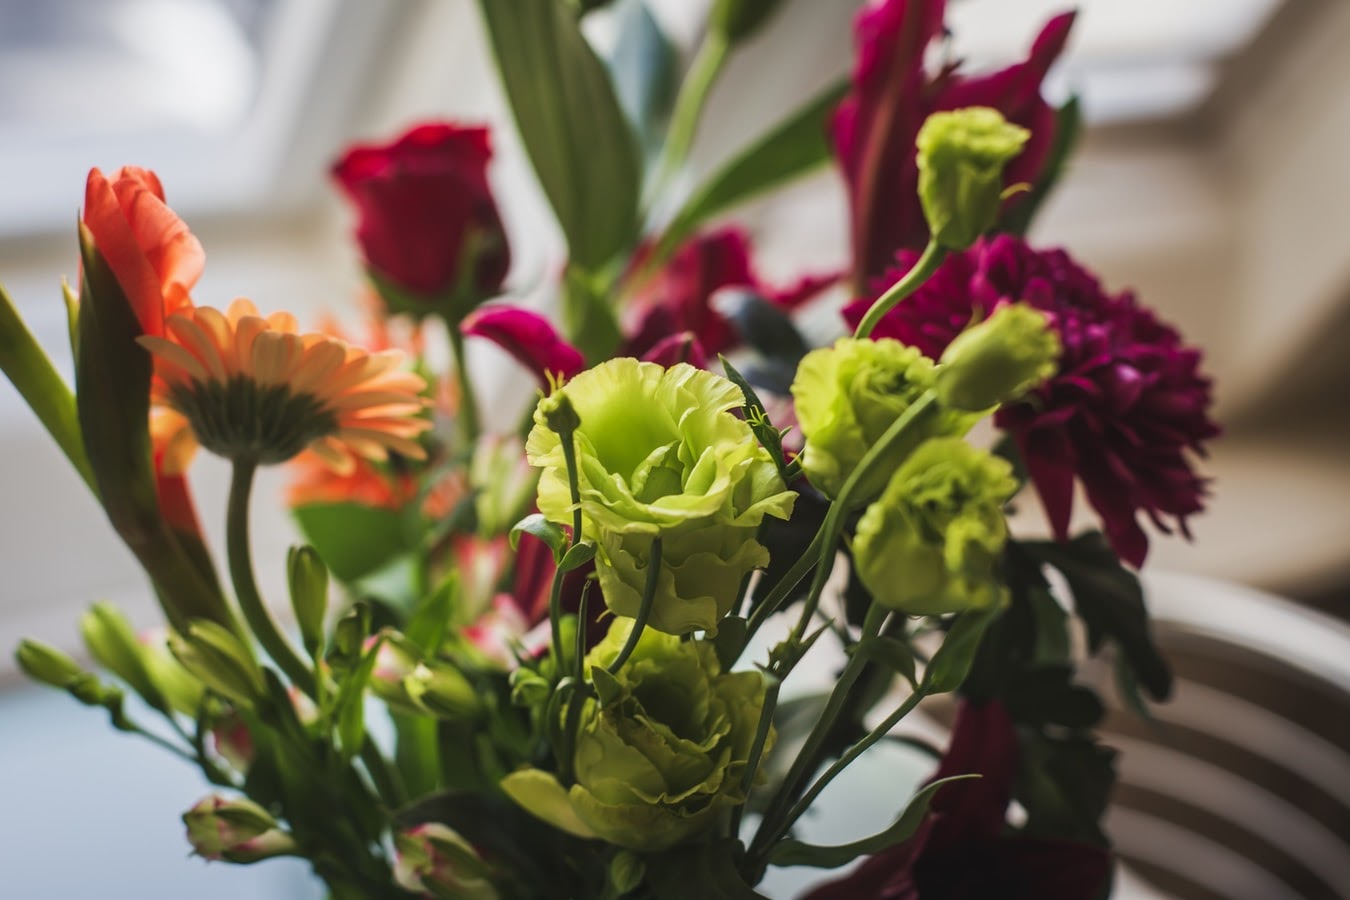 How to Make a Bouquet of Flowers: A Beginner’s Guide